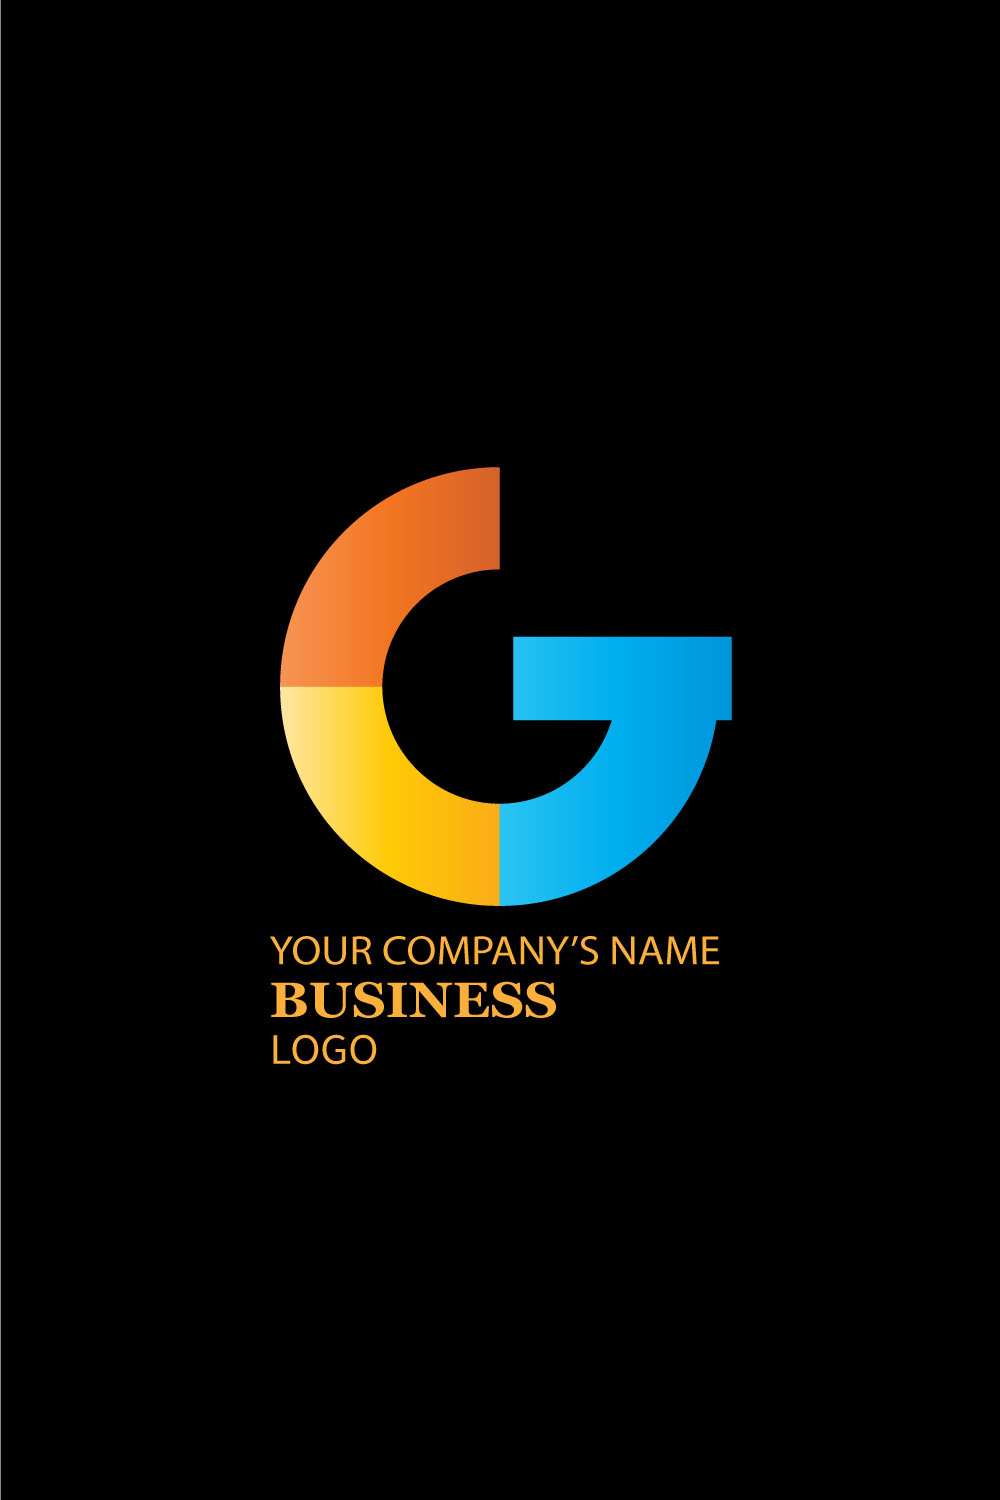 Image of a logo in the shape of the letter G with a colorful design